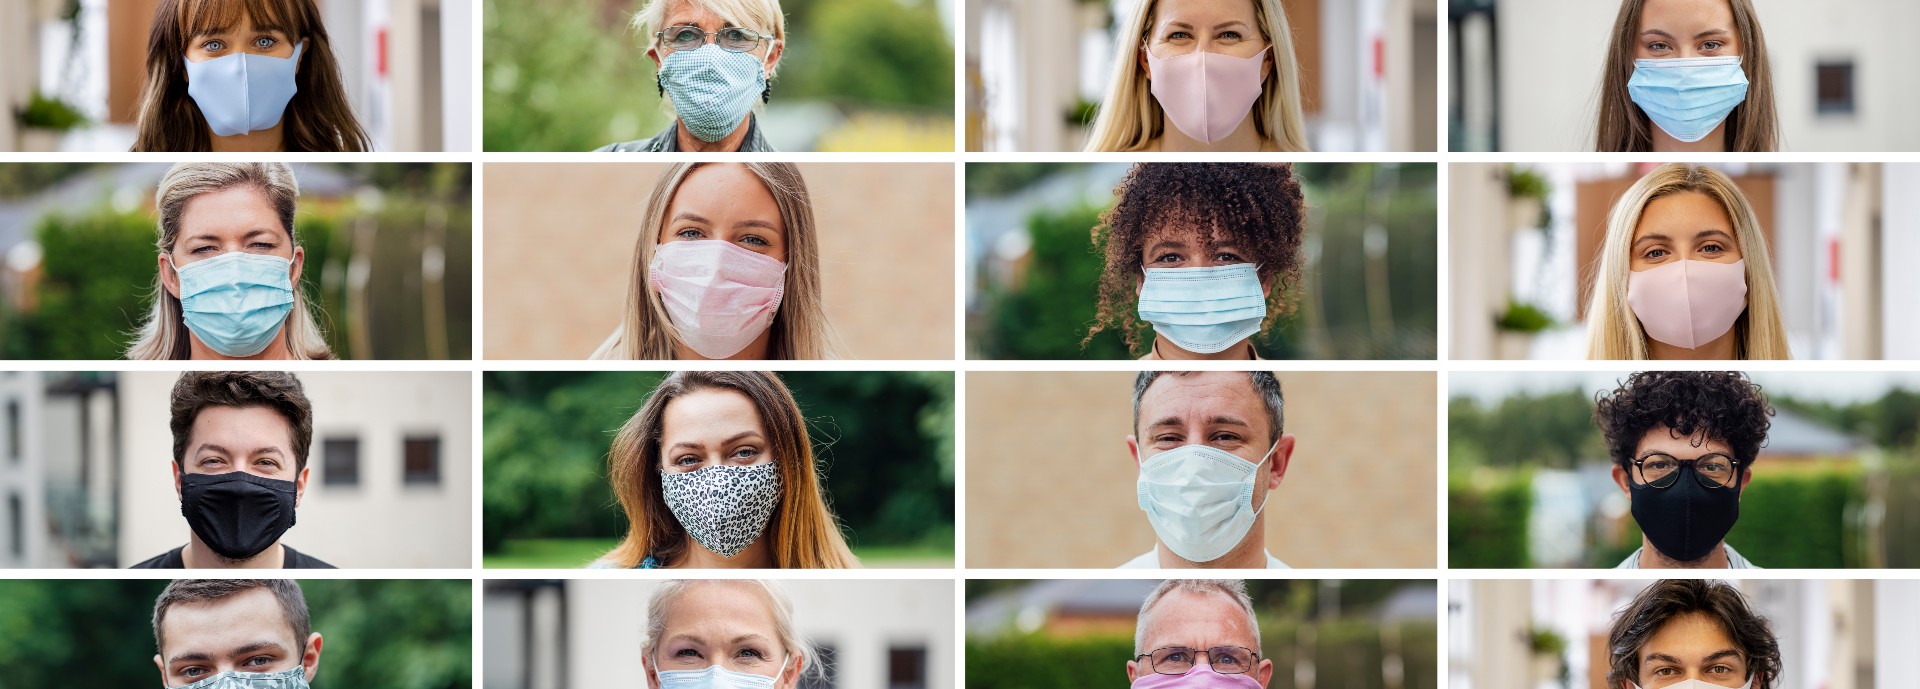 A grid of people wearing face masks